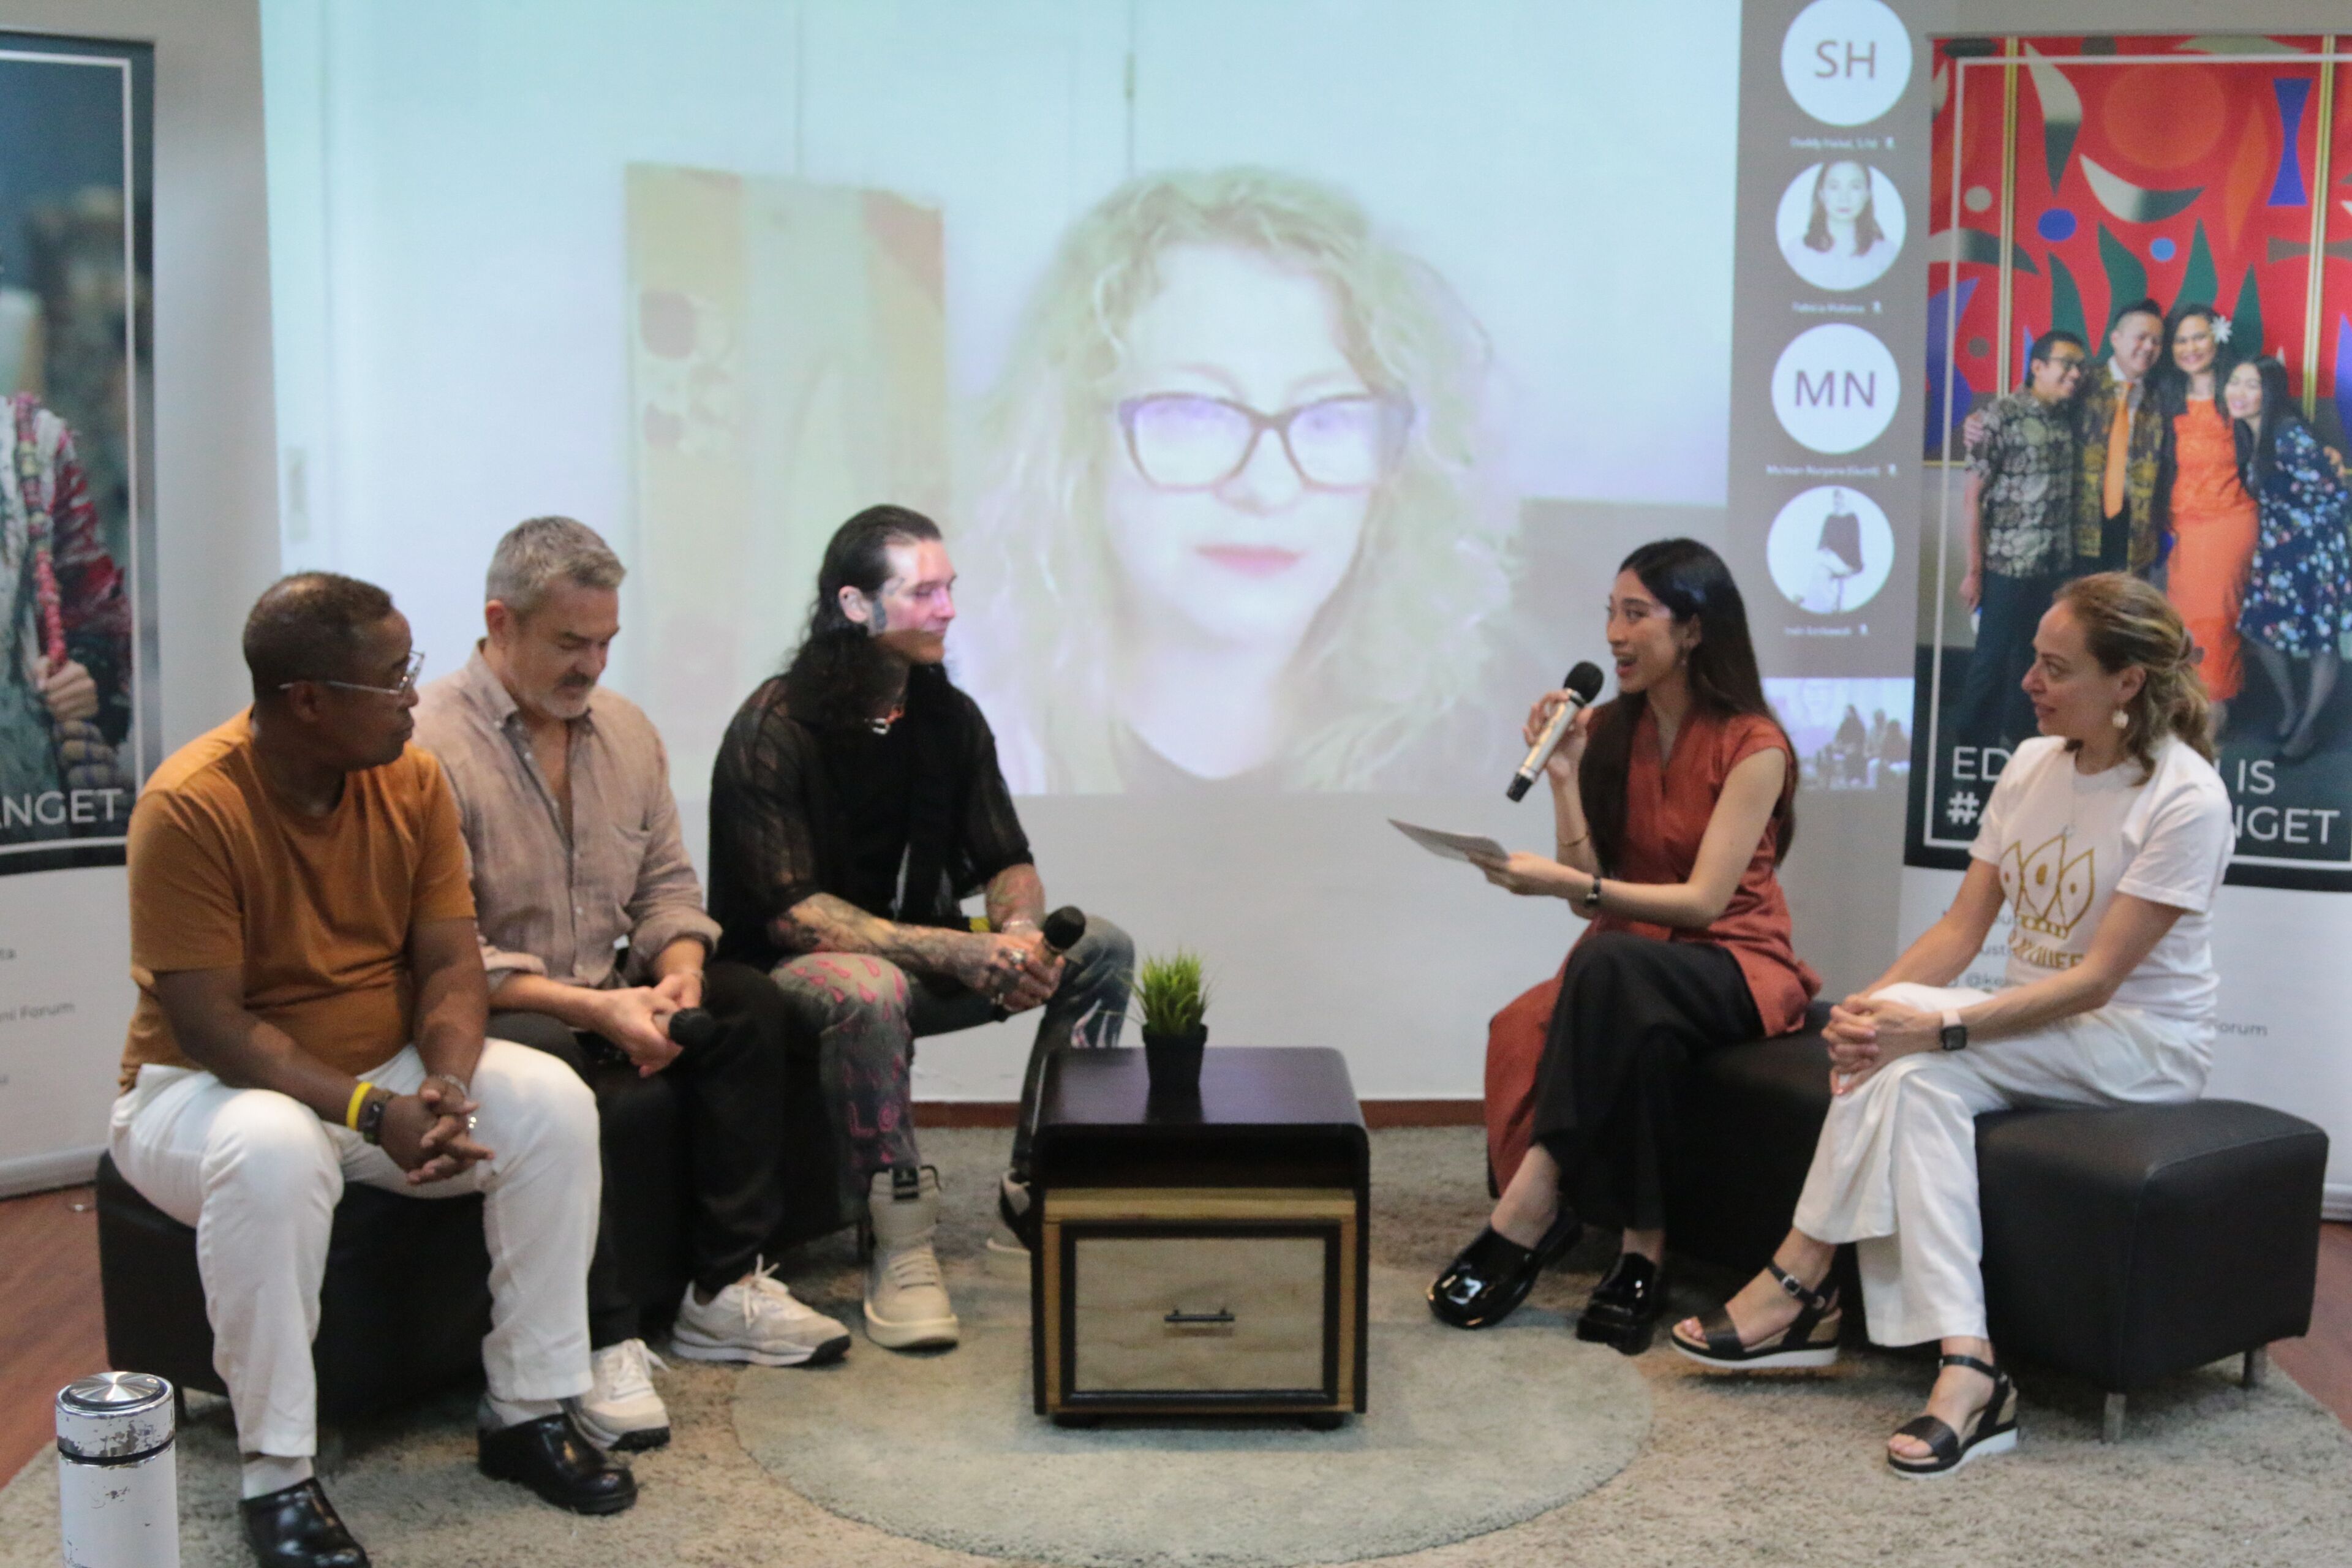 A diverse panel engages in a discussion at an event, including a virtual participant projected on the screen behind them.